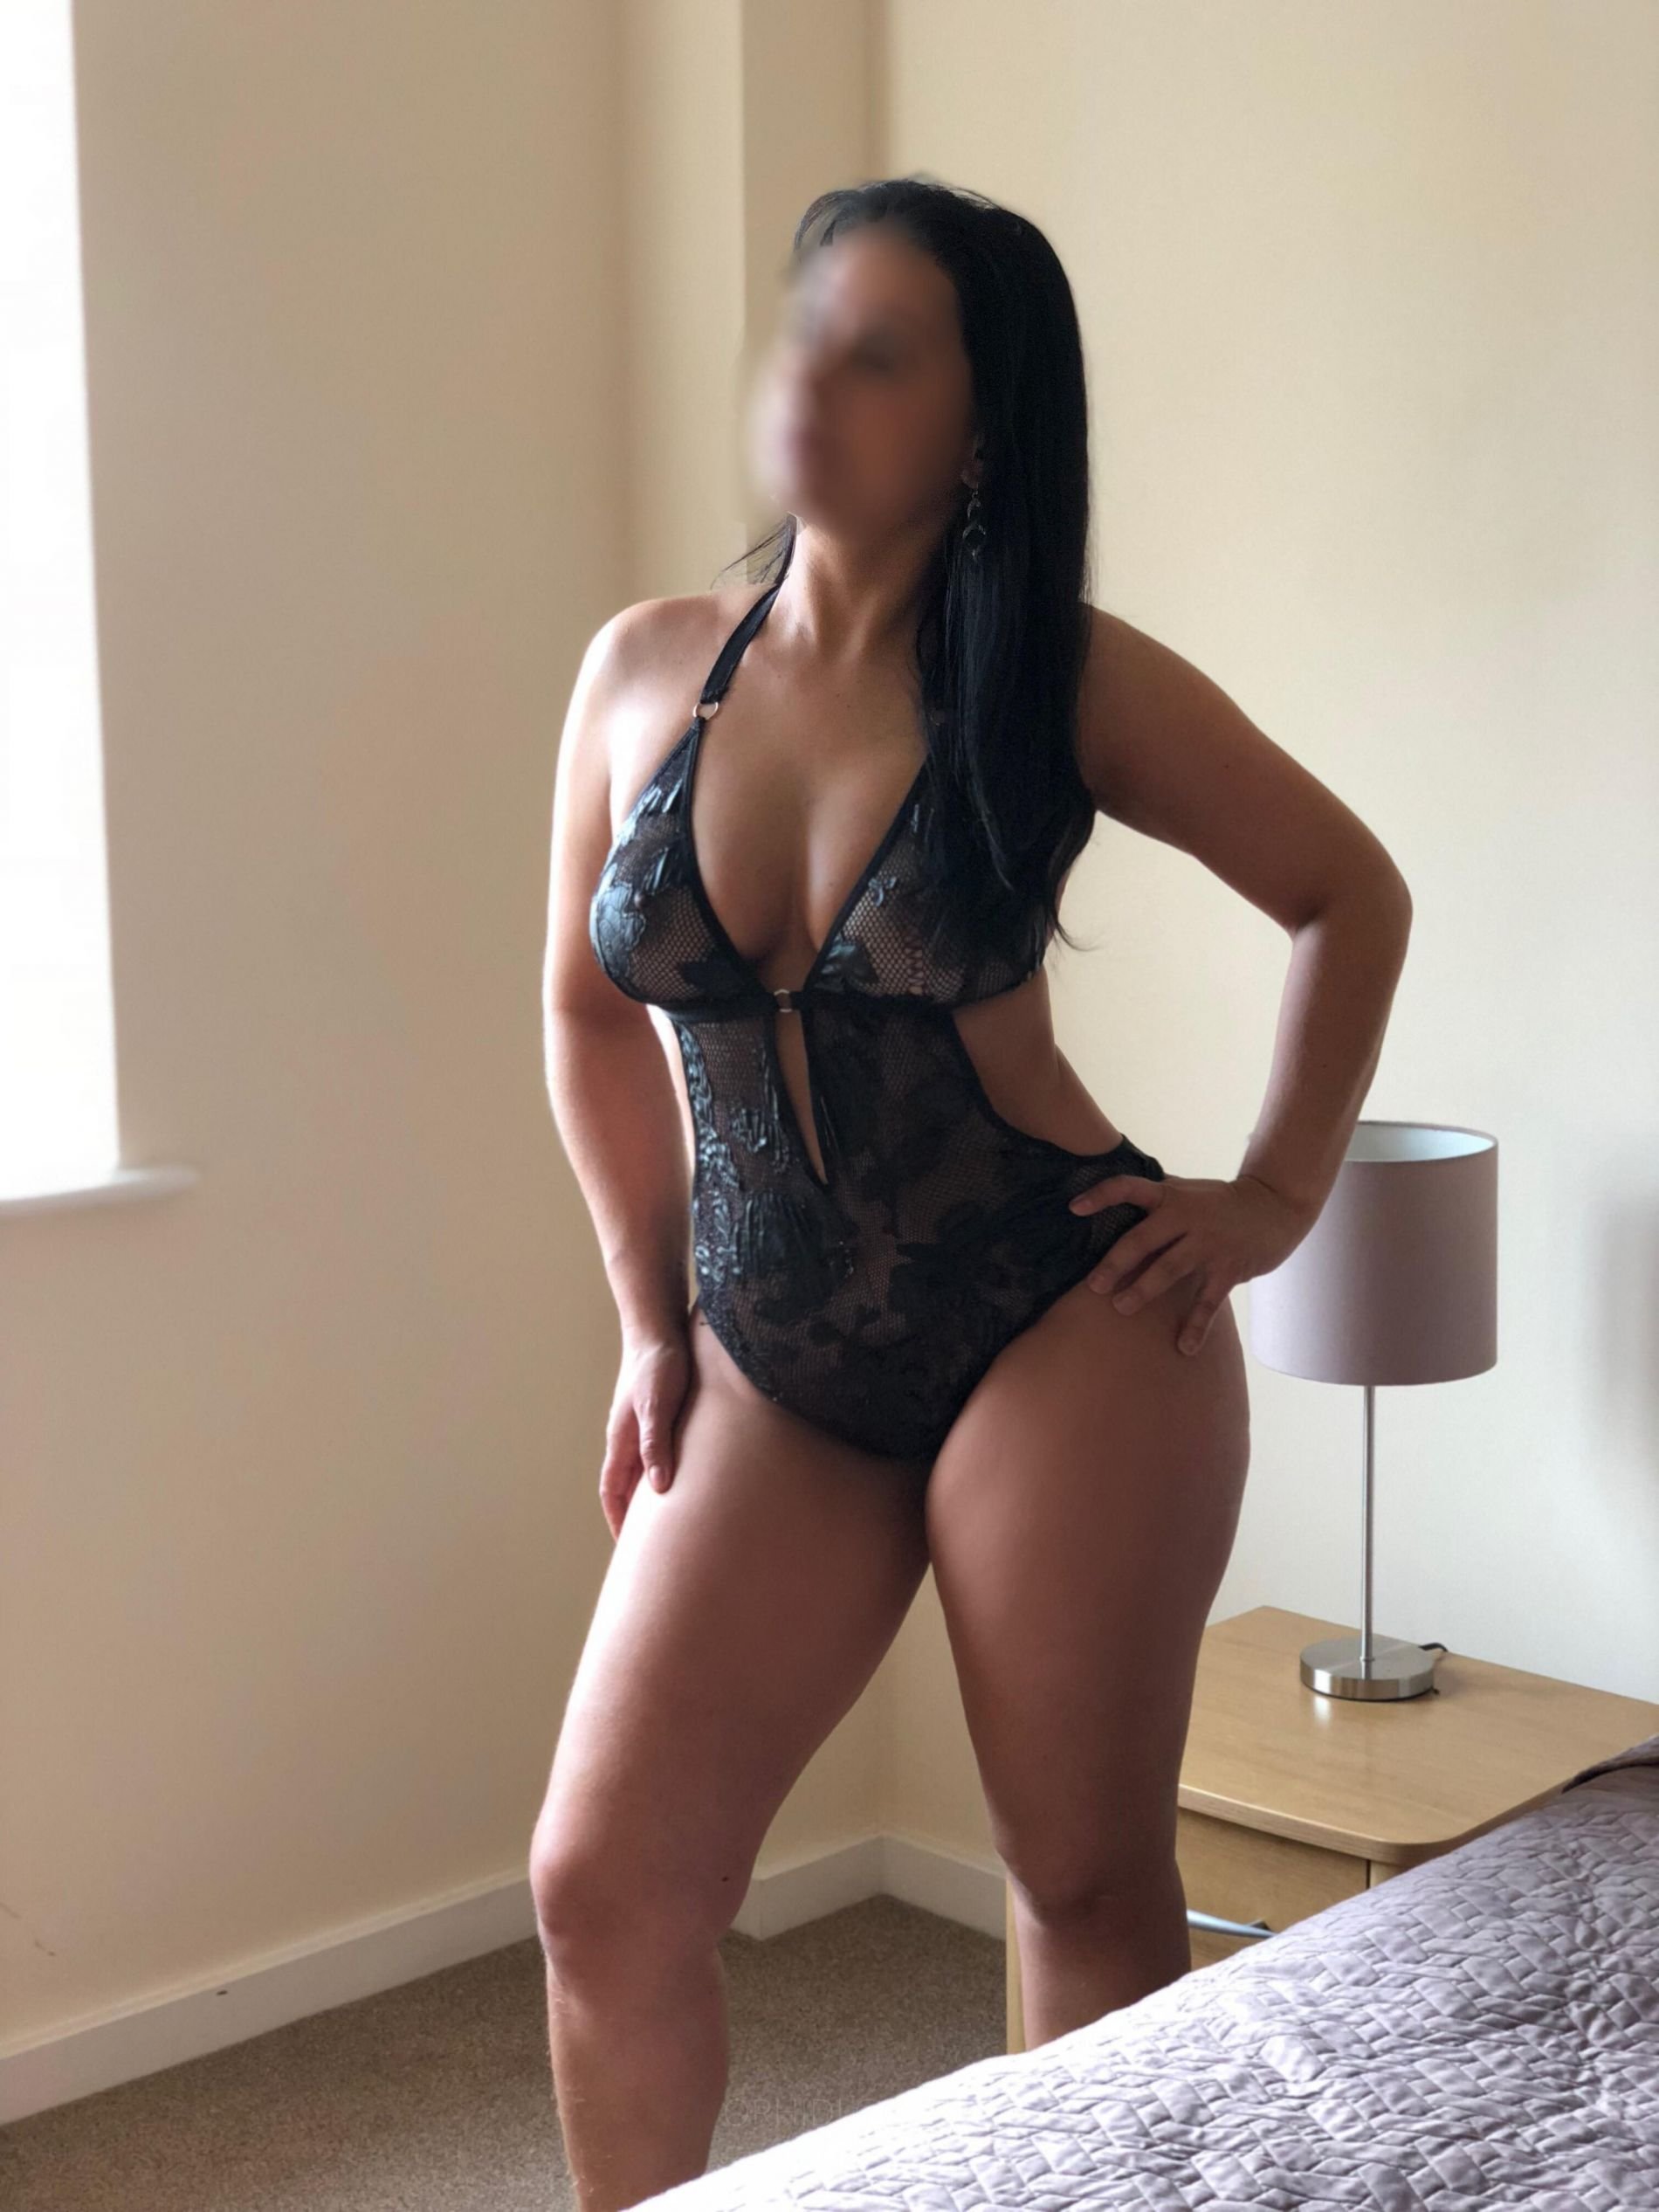 ESCORT IN Maidstone - model photo ANNE GEOURGES